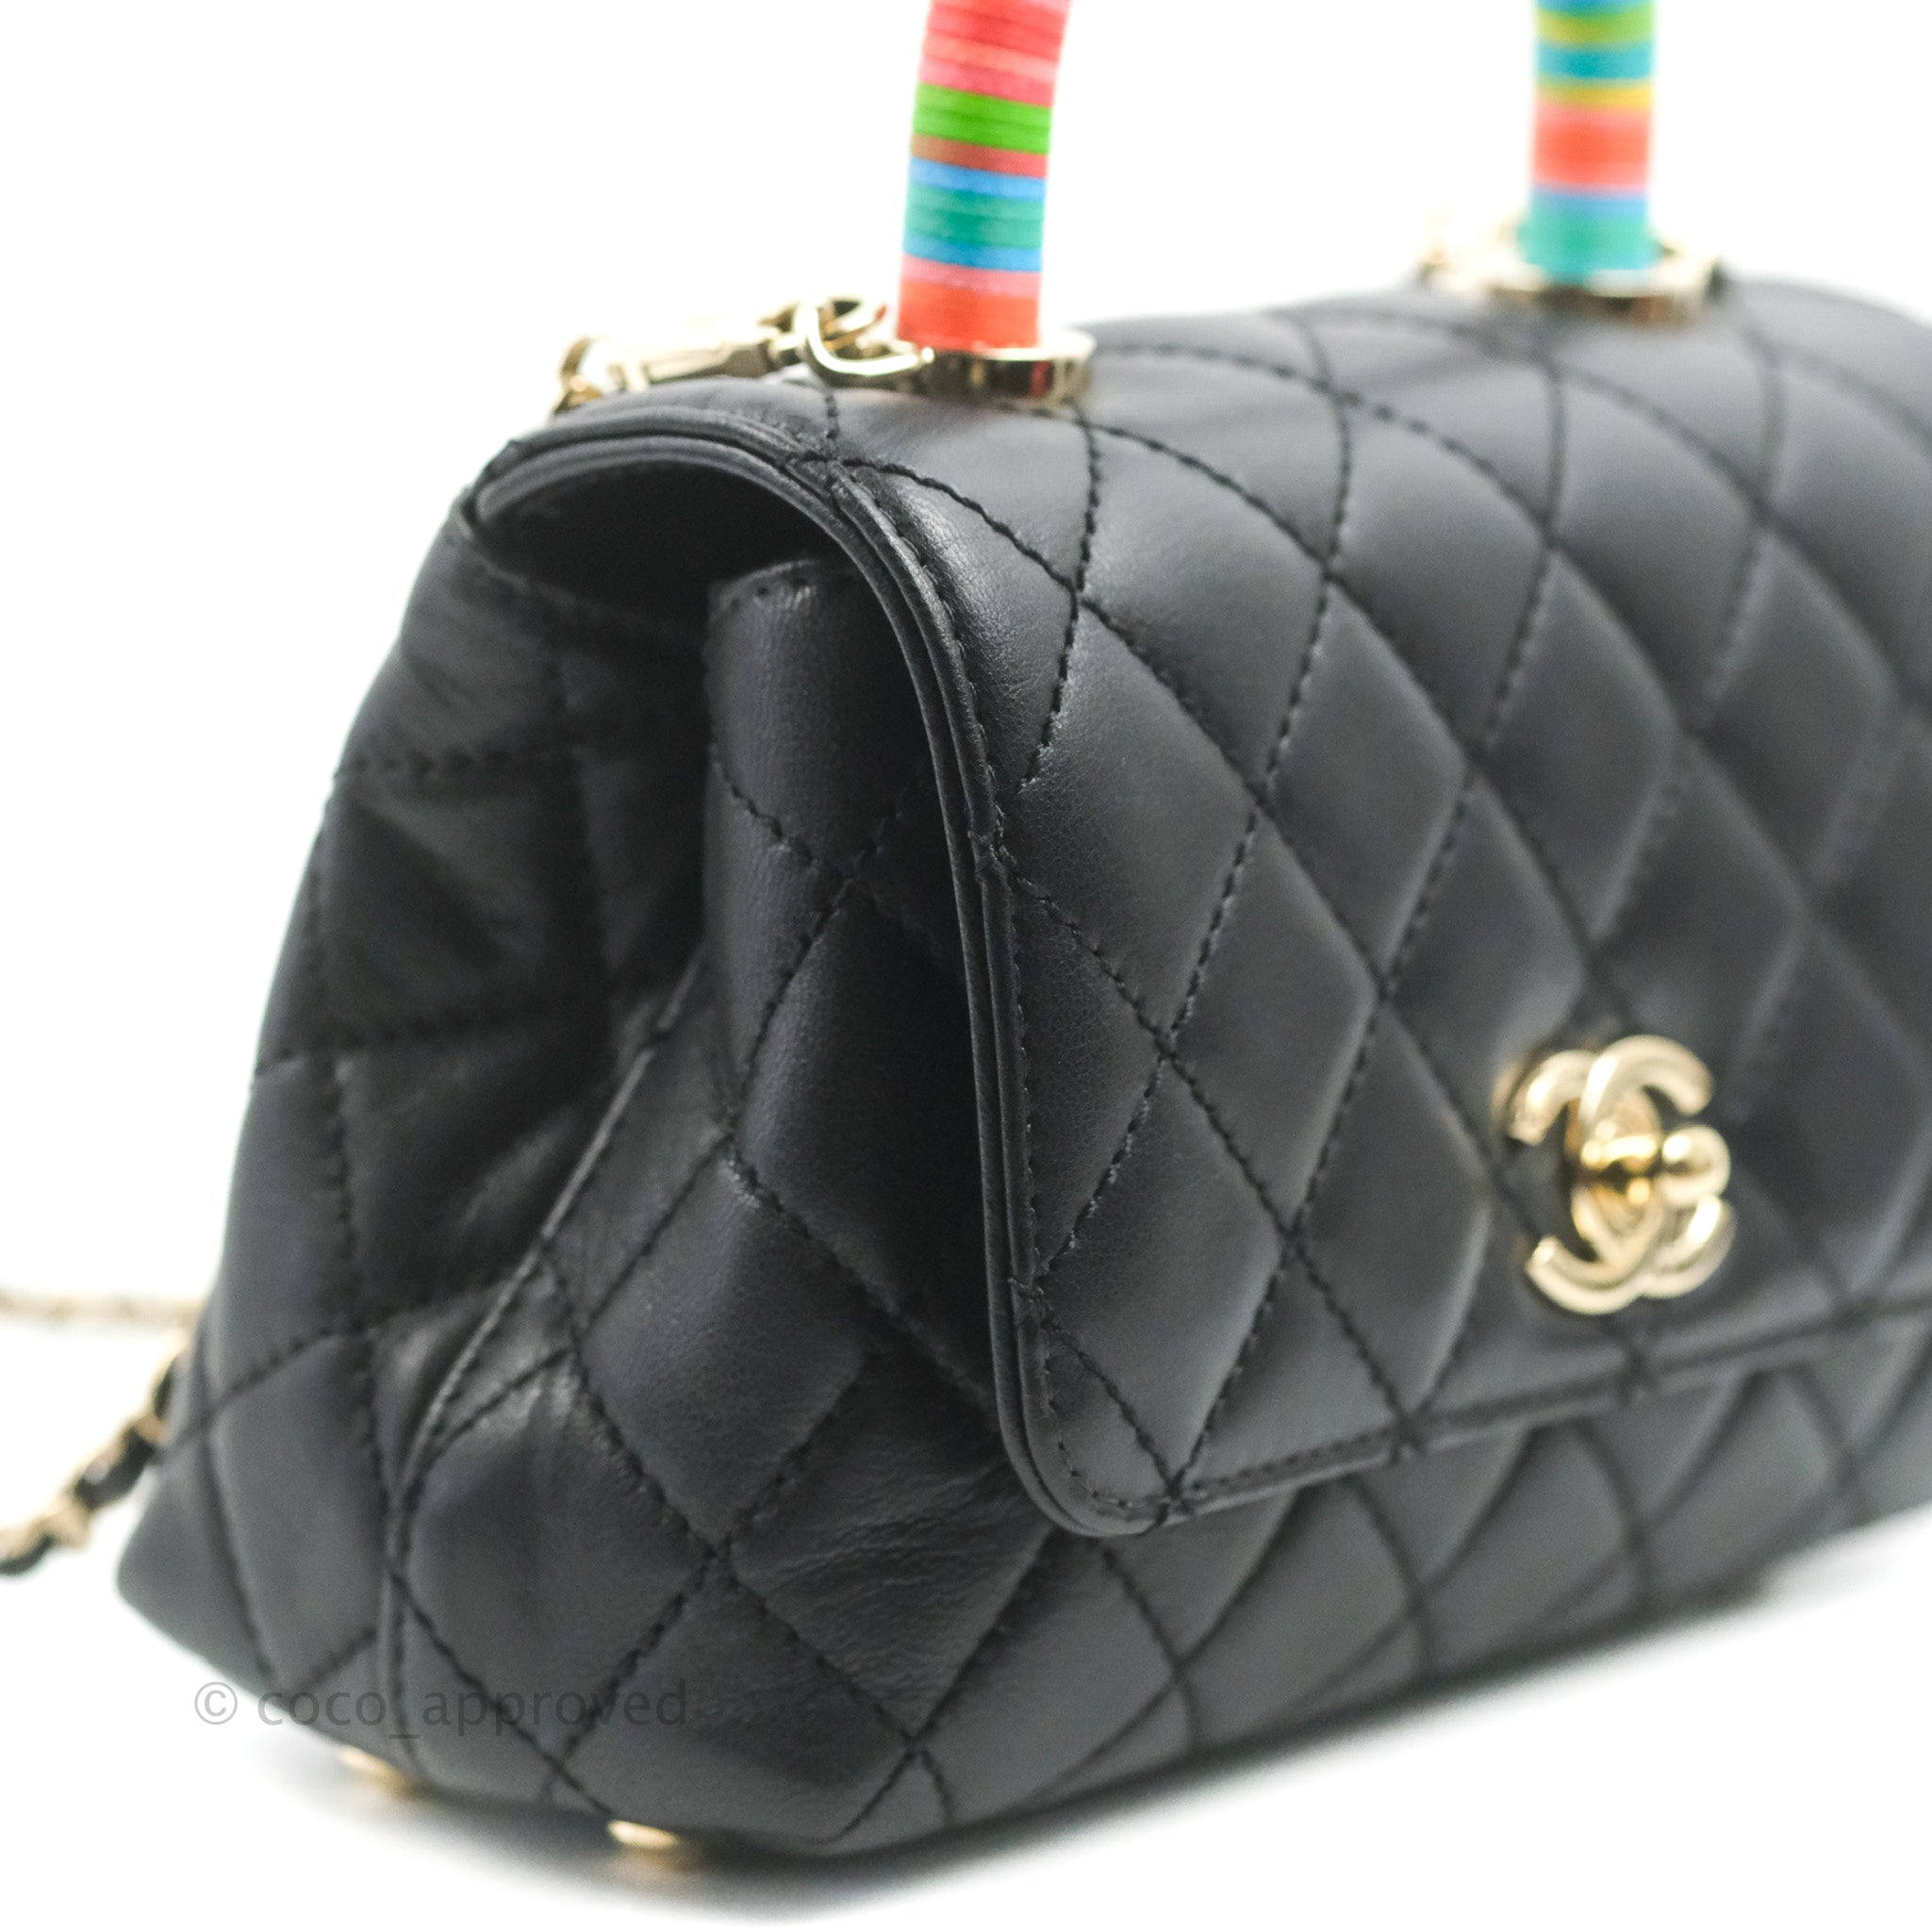 Chanel Quilted Mini Rainbow Coco Handle Bag Lambskin Black Gold Hardwa – Coco  Approved Studio